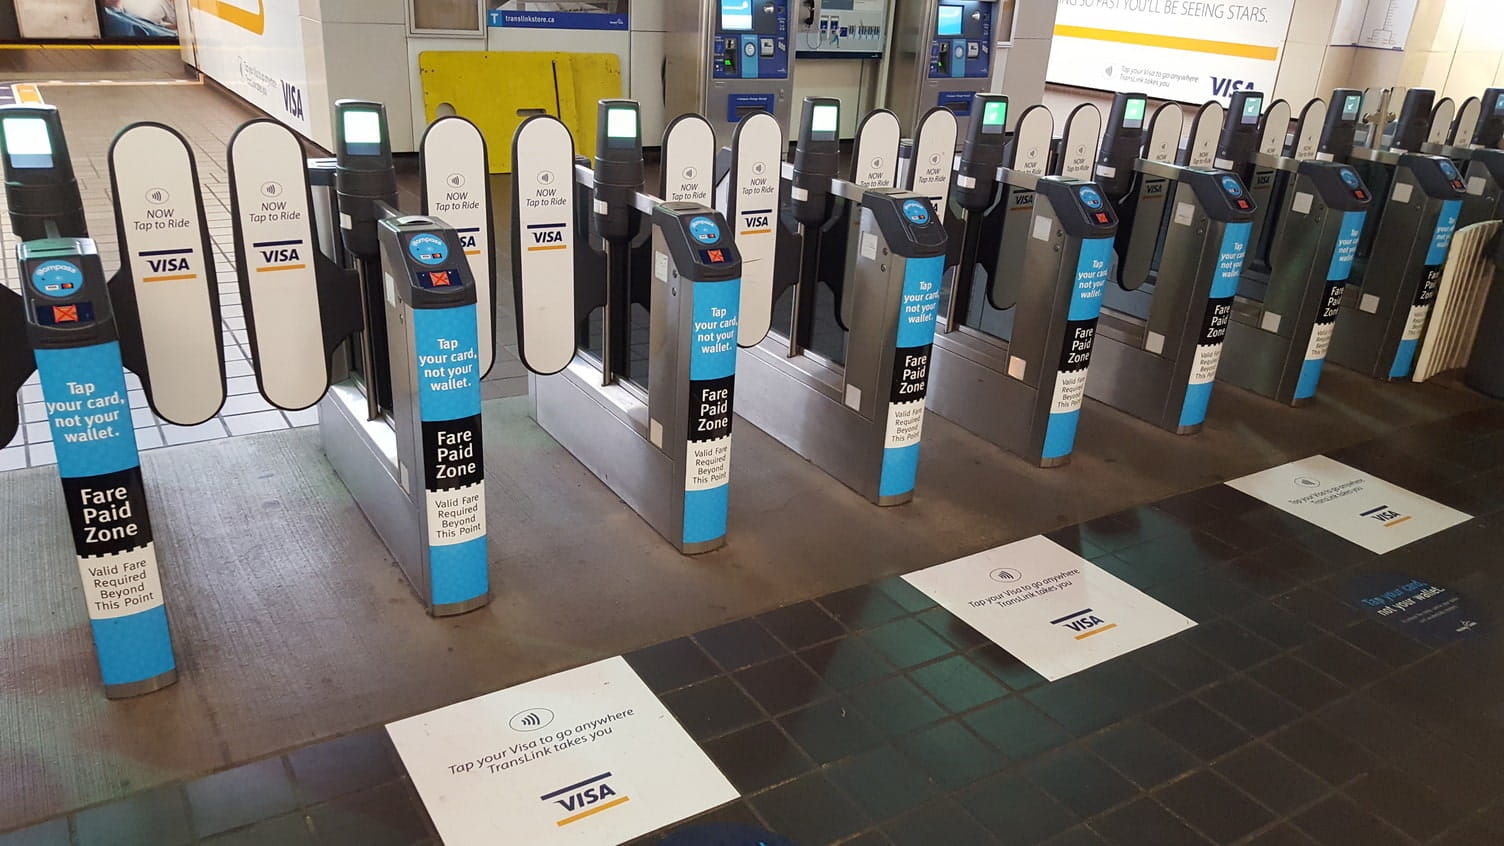 Closed fare gates displaying signs promoting Tap to Pay